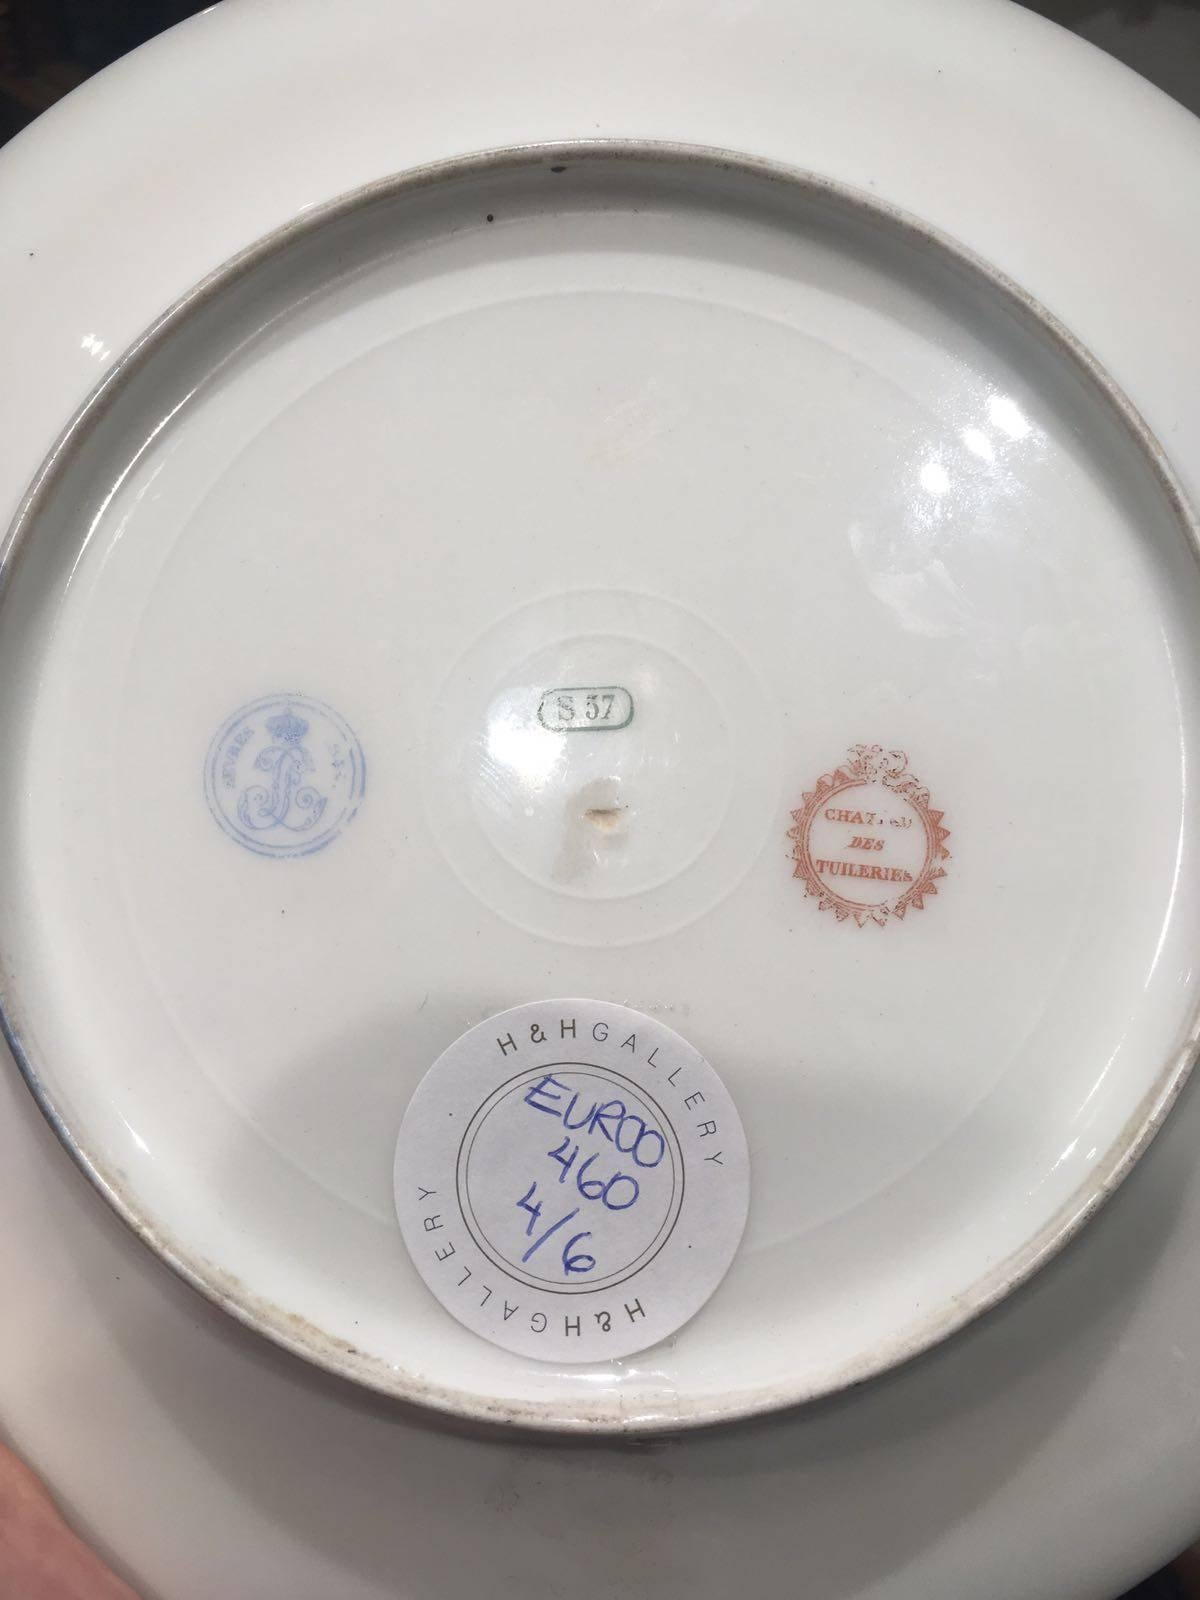 Each one is stamped underneath with: the blue Sevres Louis-Philippe mark dated 1844, the orange Chateau des Tuileries, along with a set number 'S37' in green, and handwritten (faded or mostly disappeared - visible under angled light) cursive writing